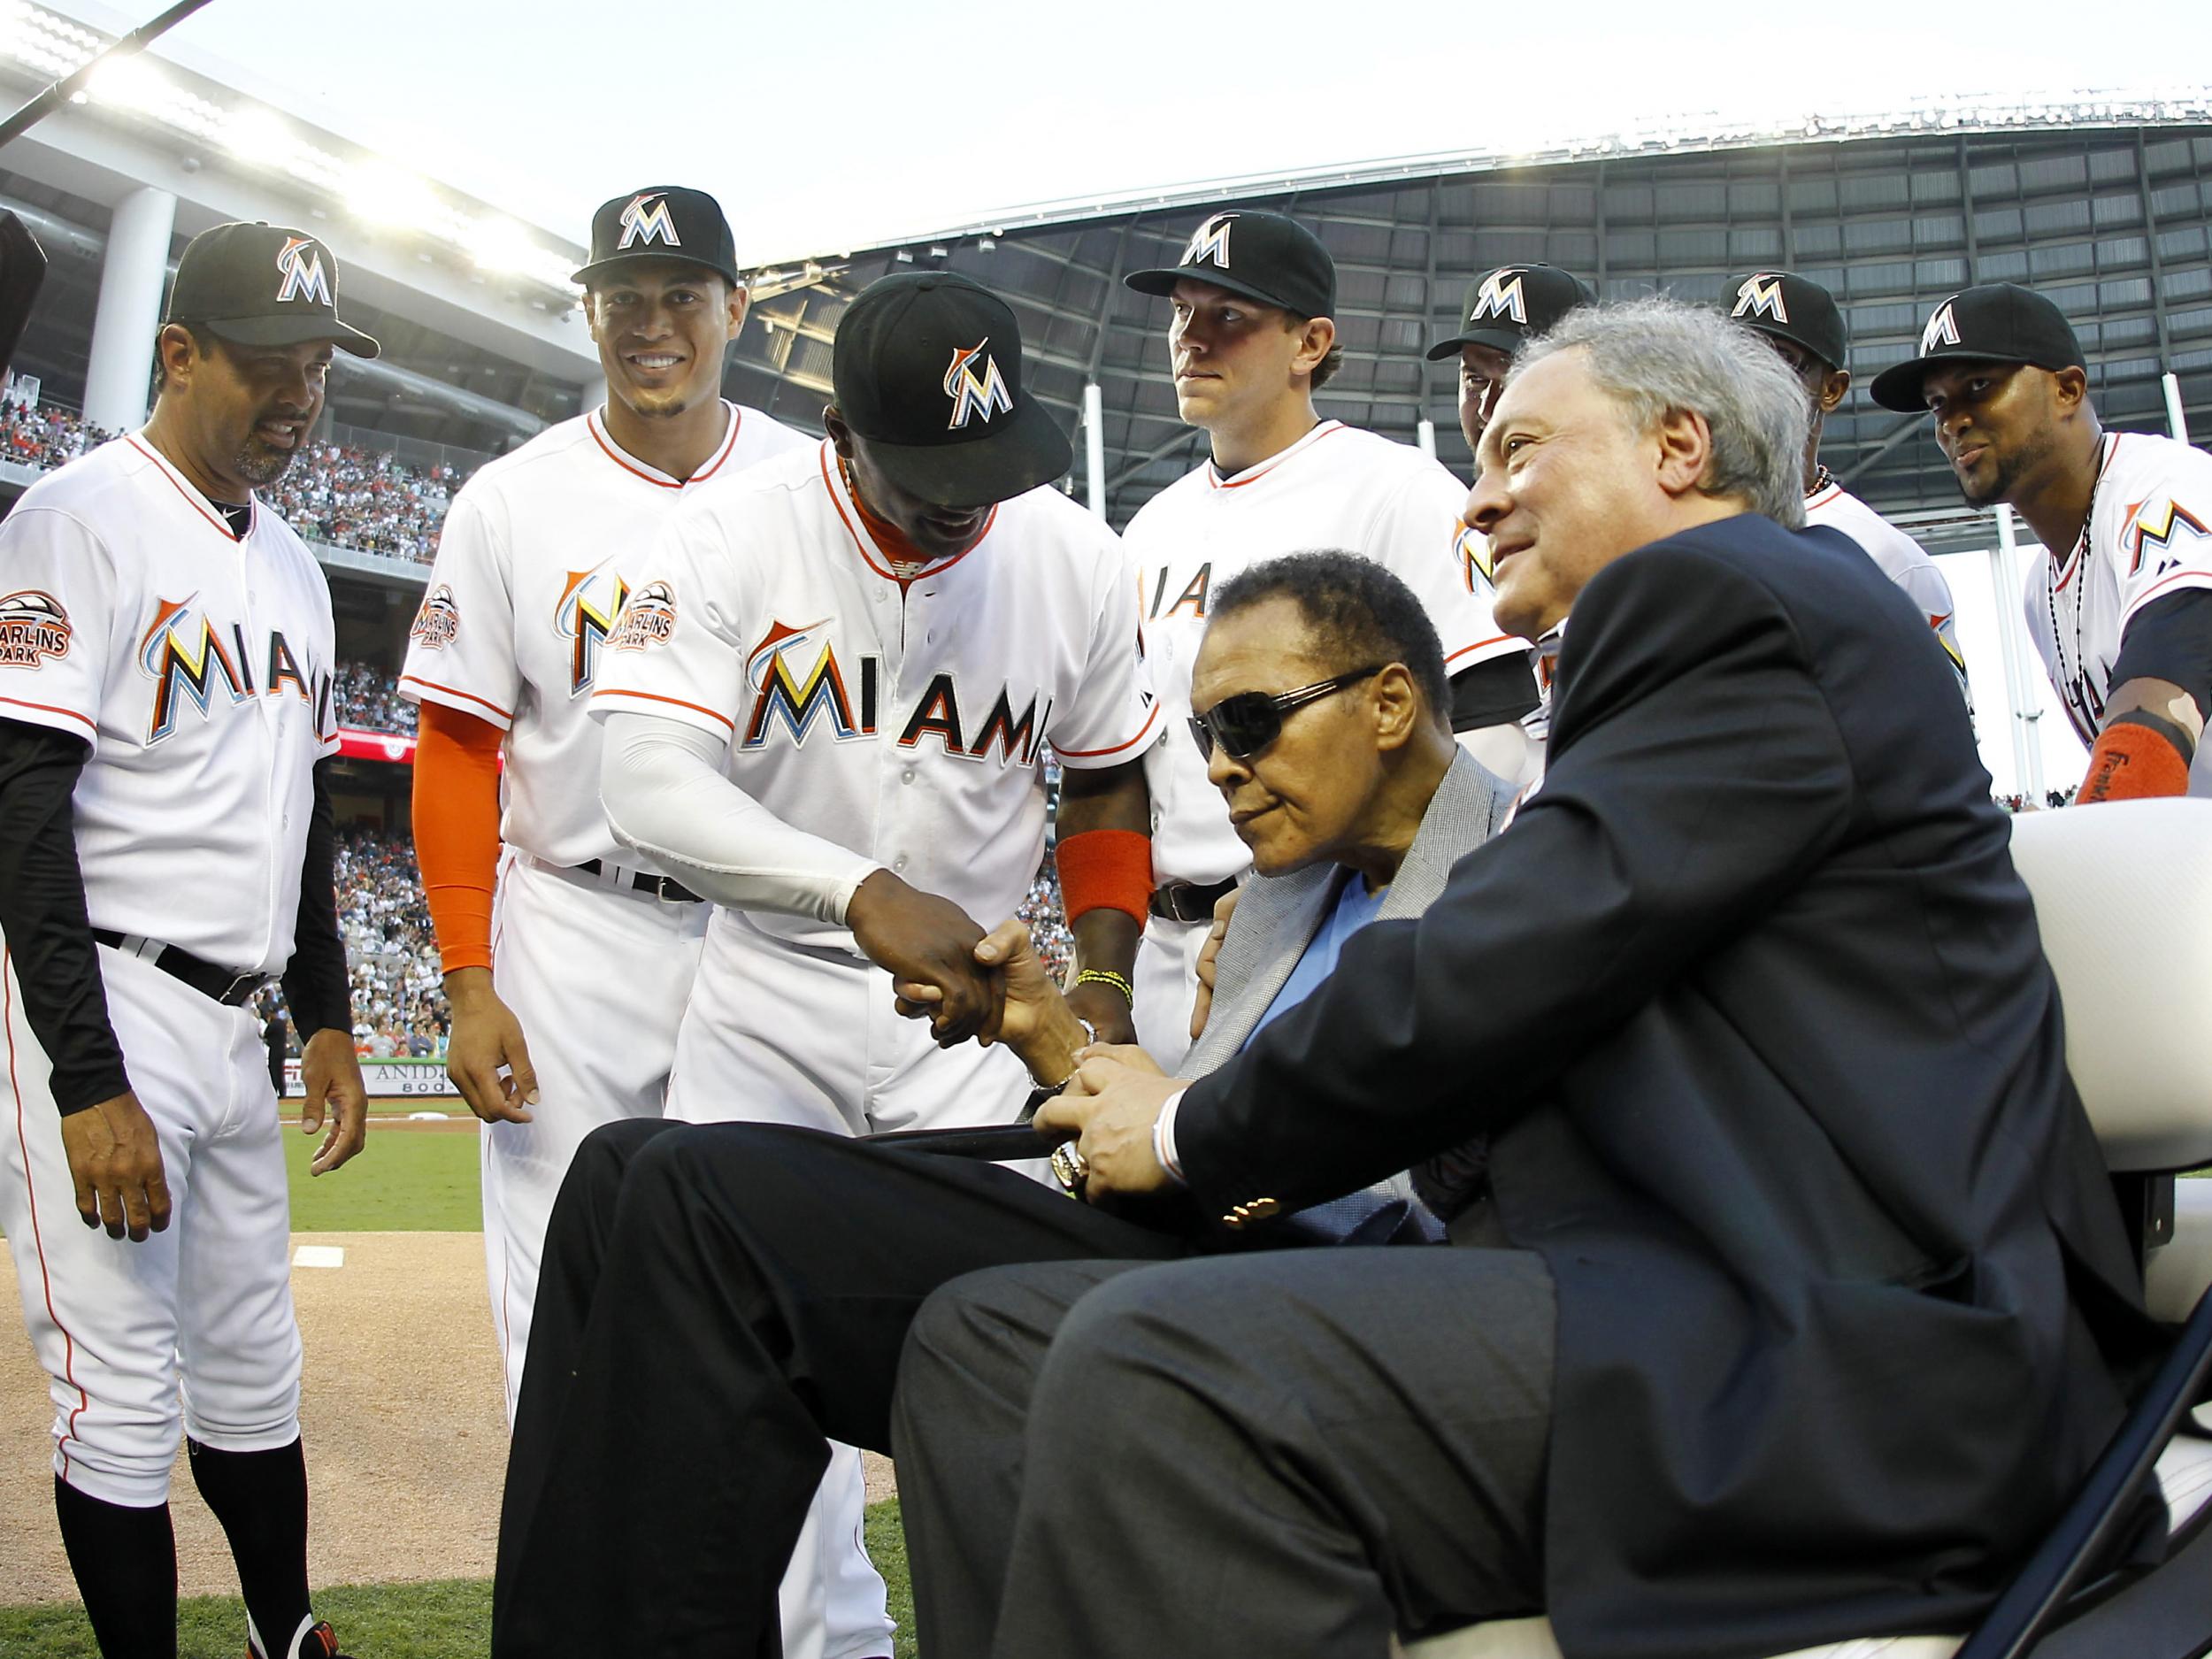 Boxing legend Muhammed Ali rides with Miami Marlins owner Jeffery Loria